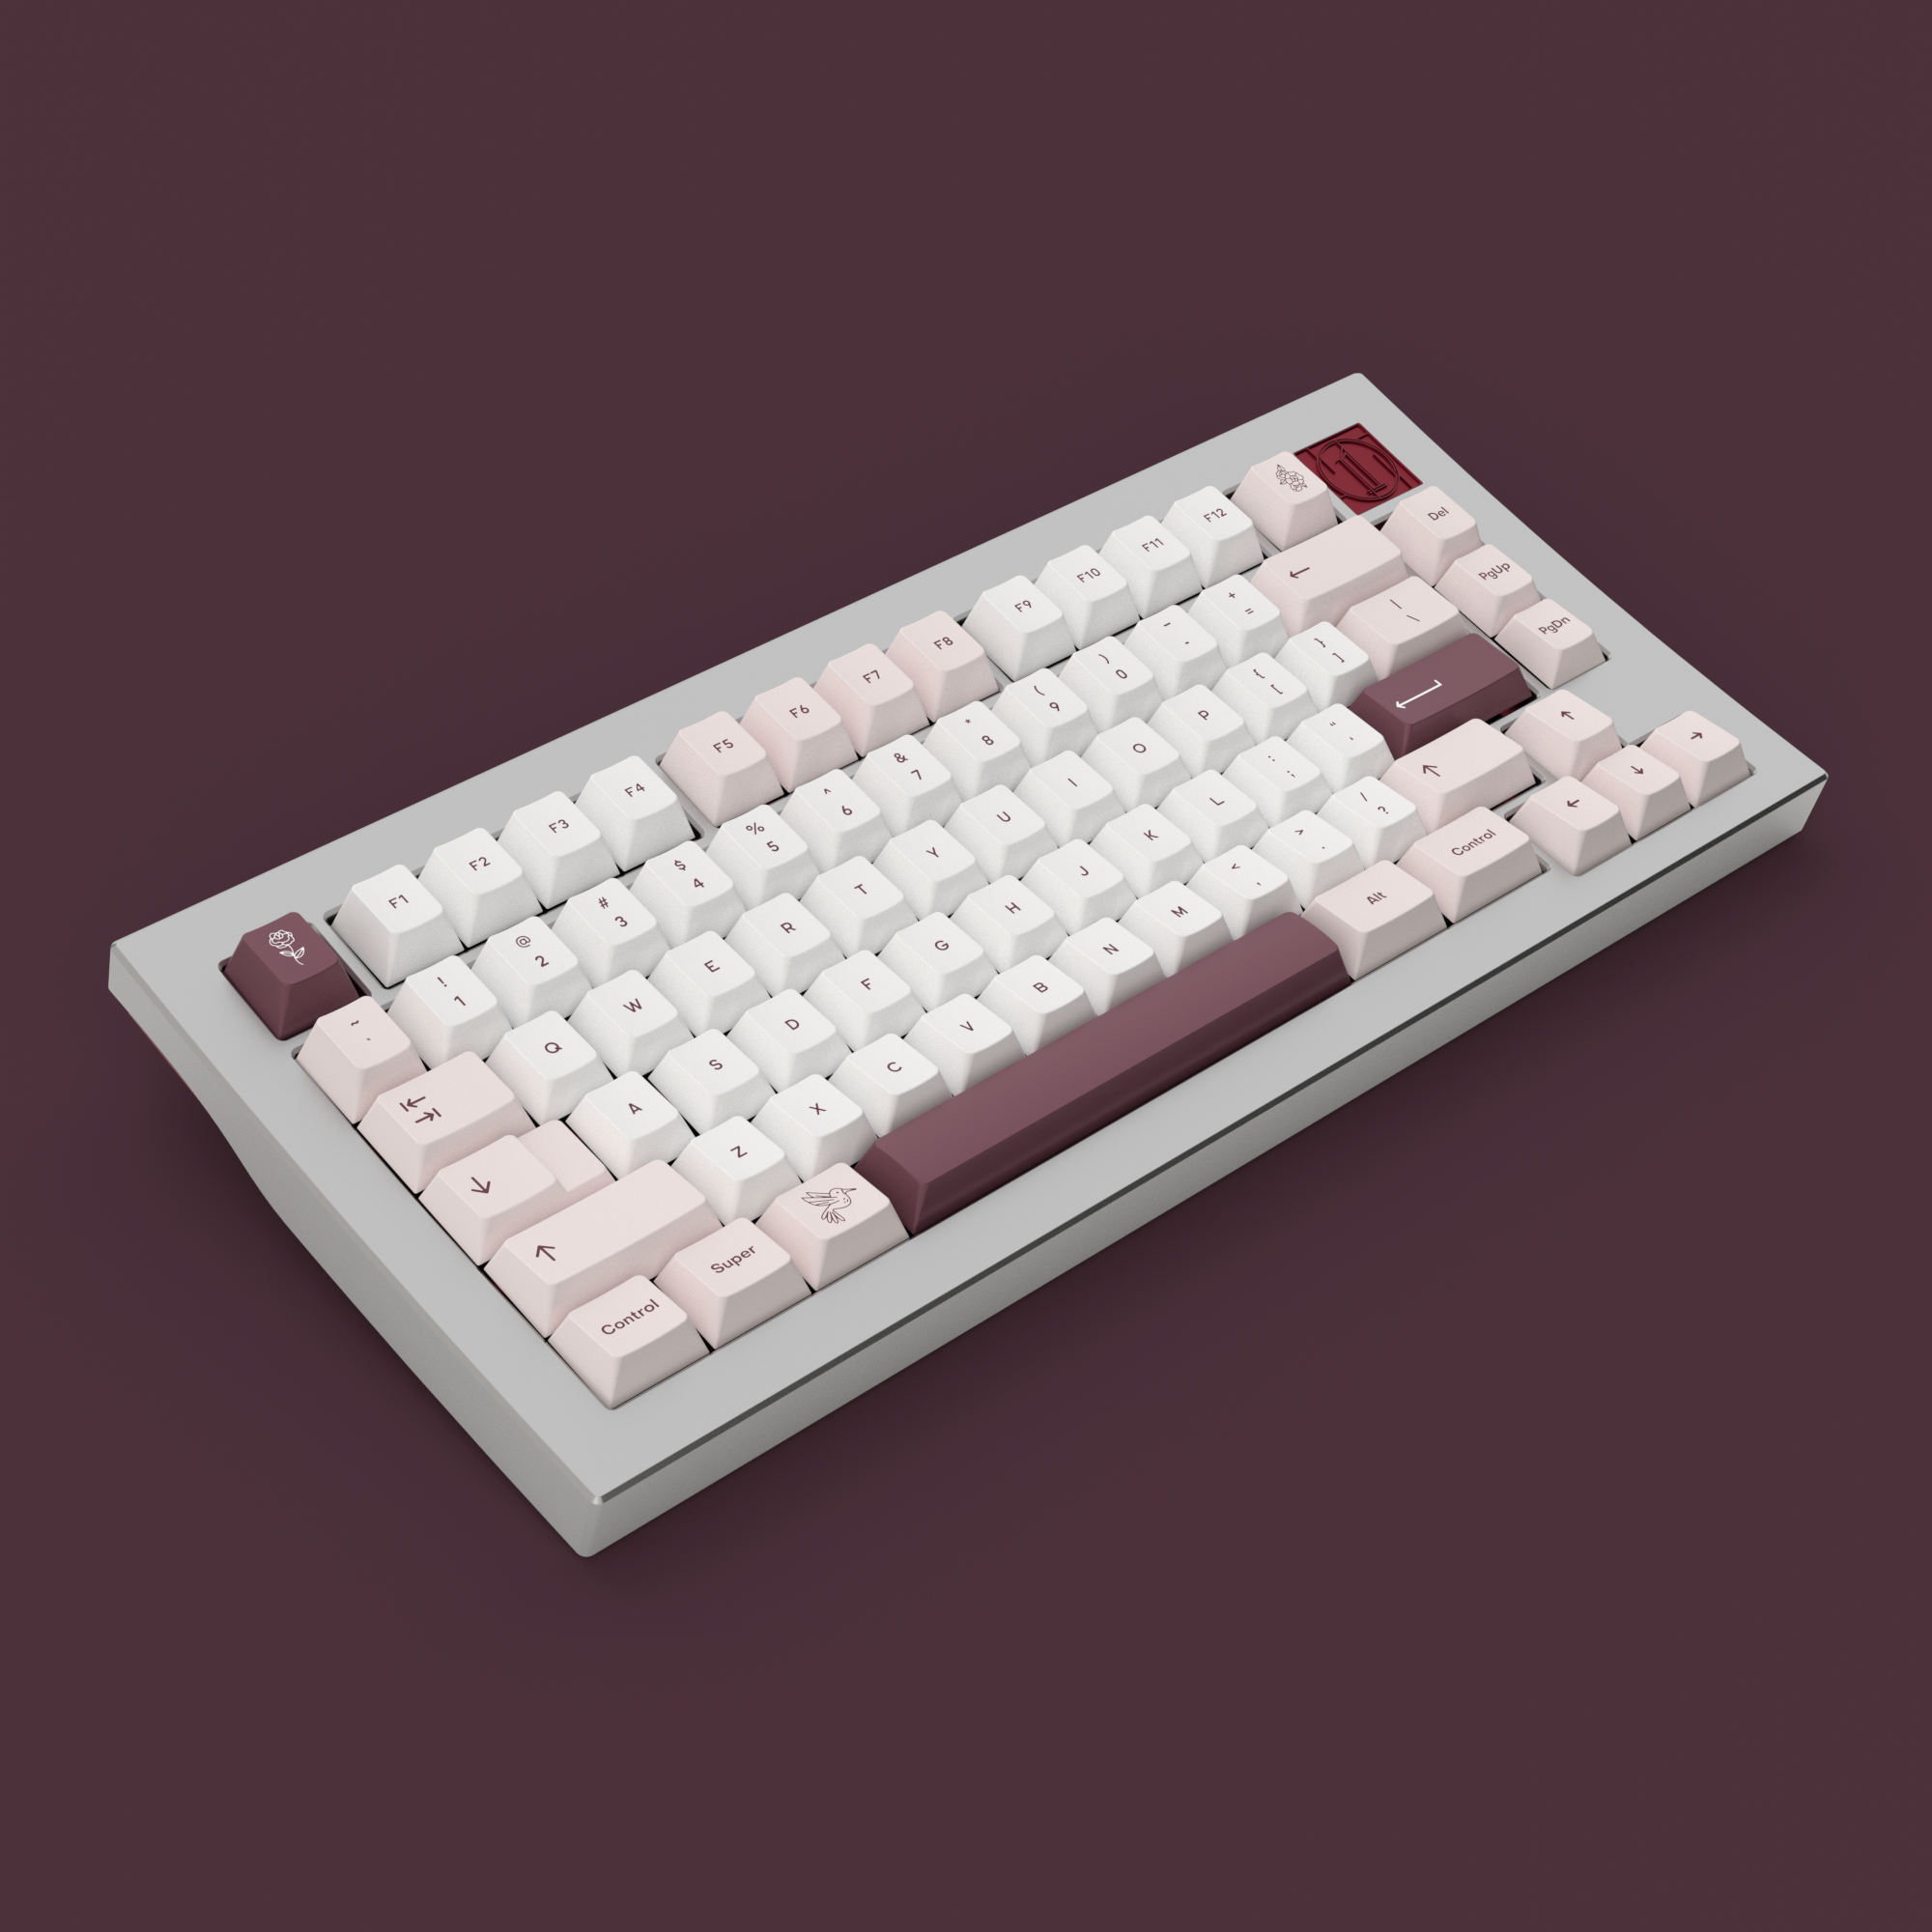 RENDER: Teacaps Rosewater keycaps on a silver Werk One keyboard against a red background.